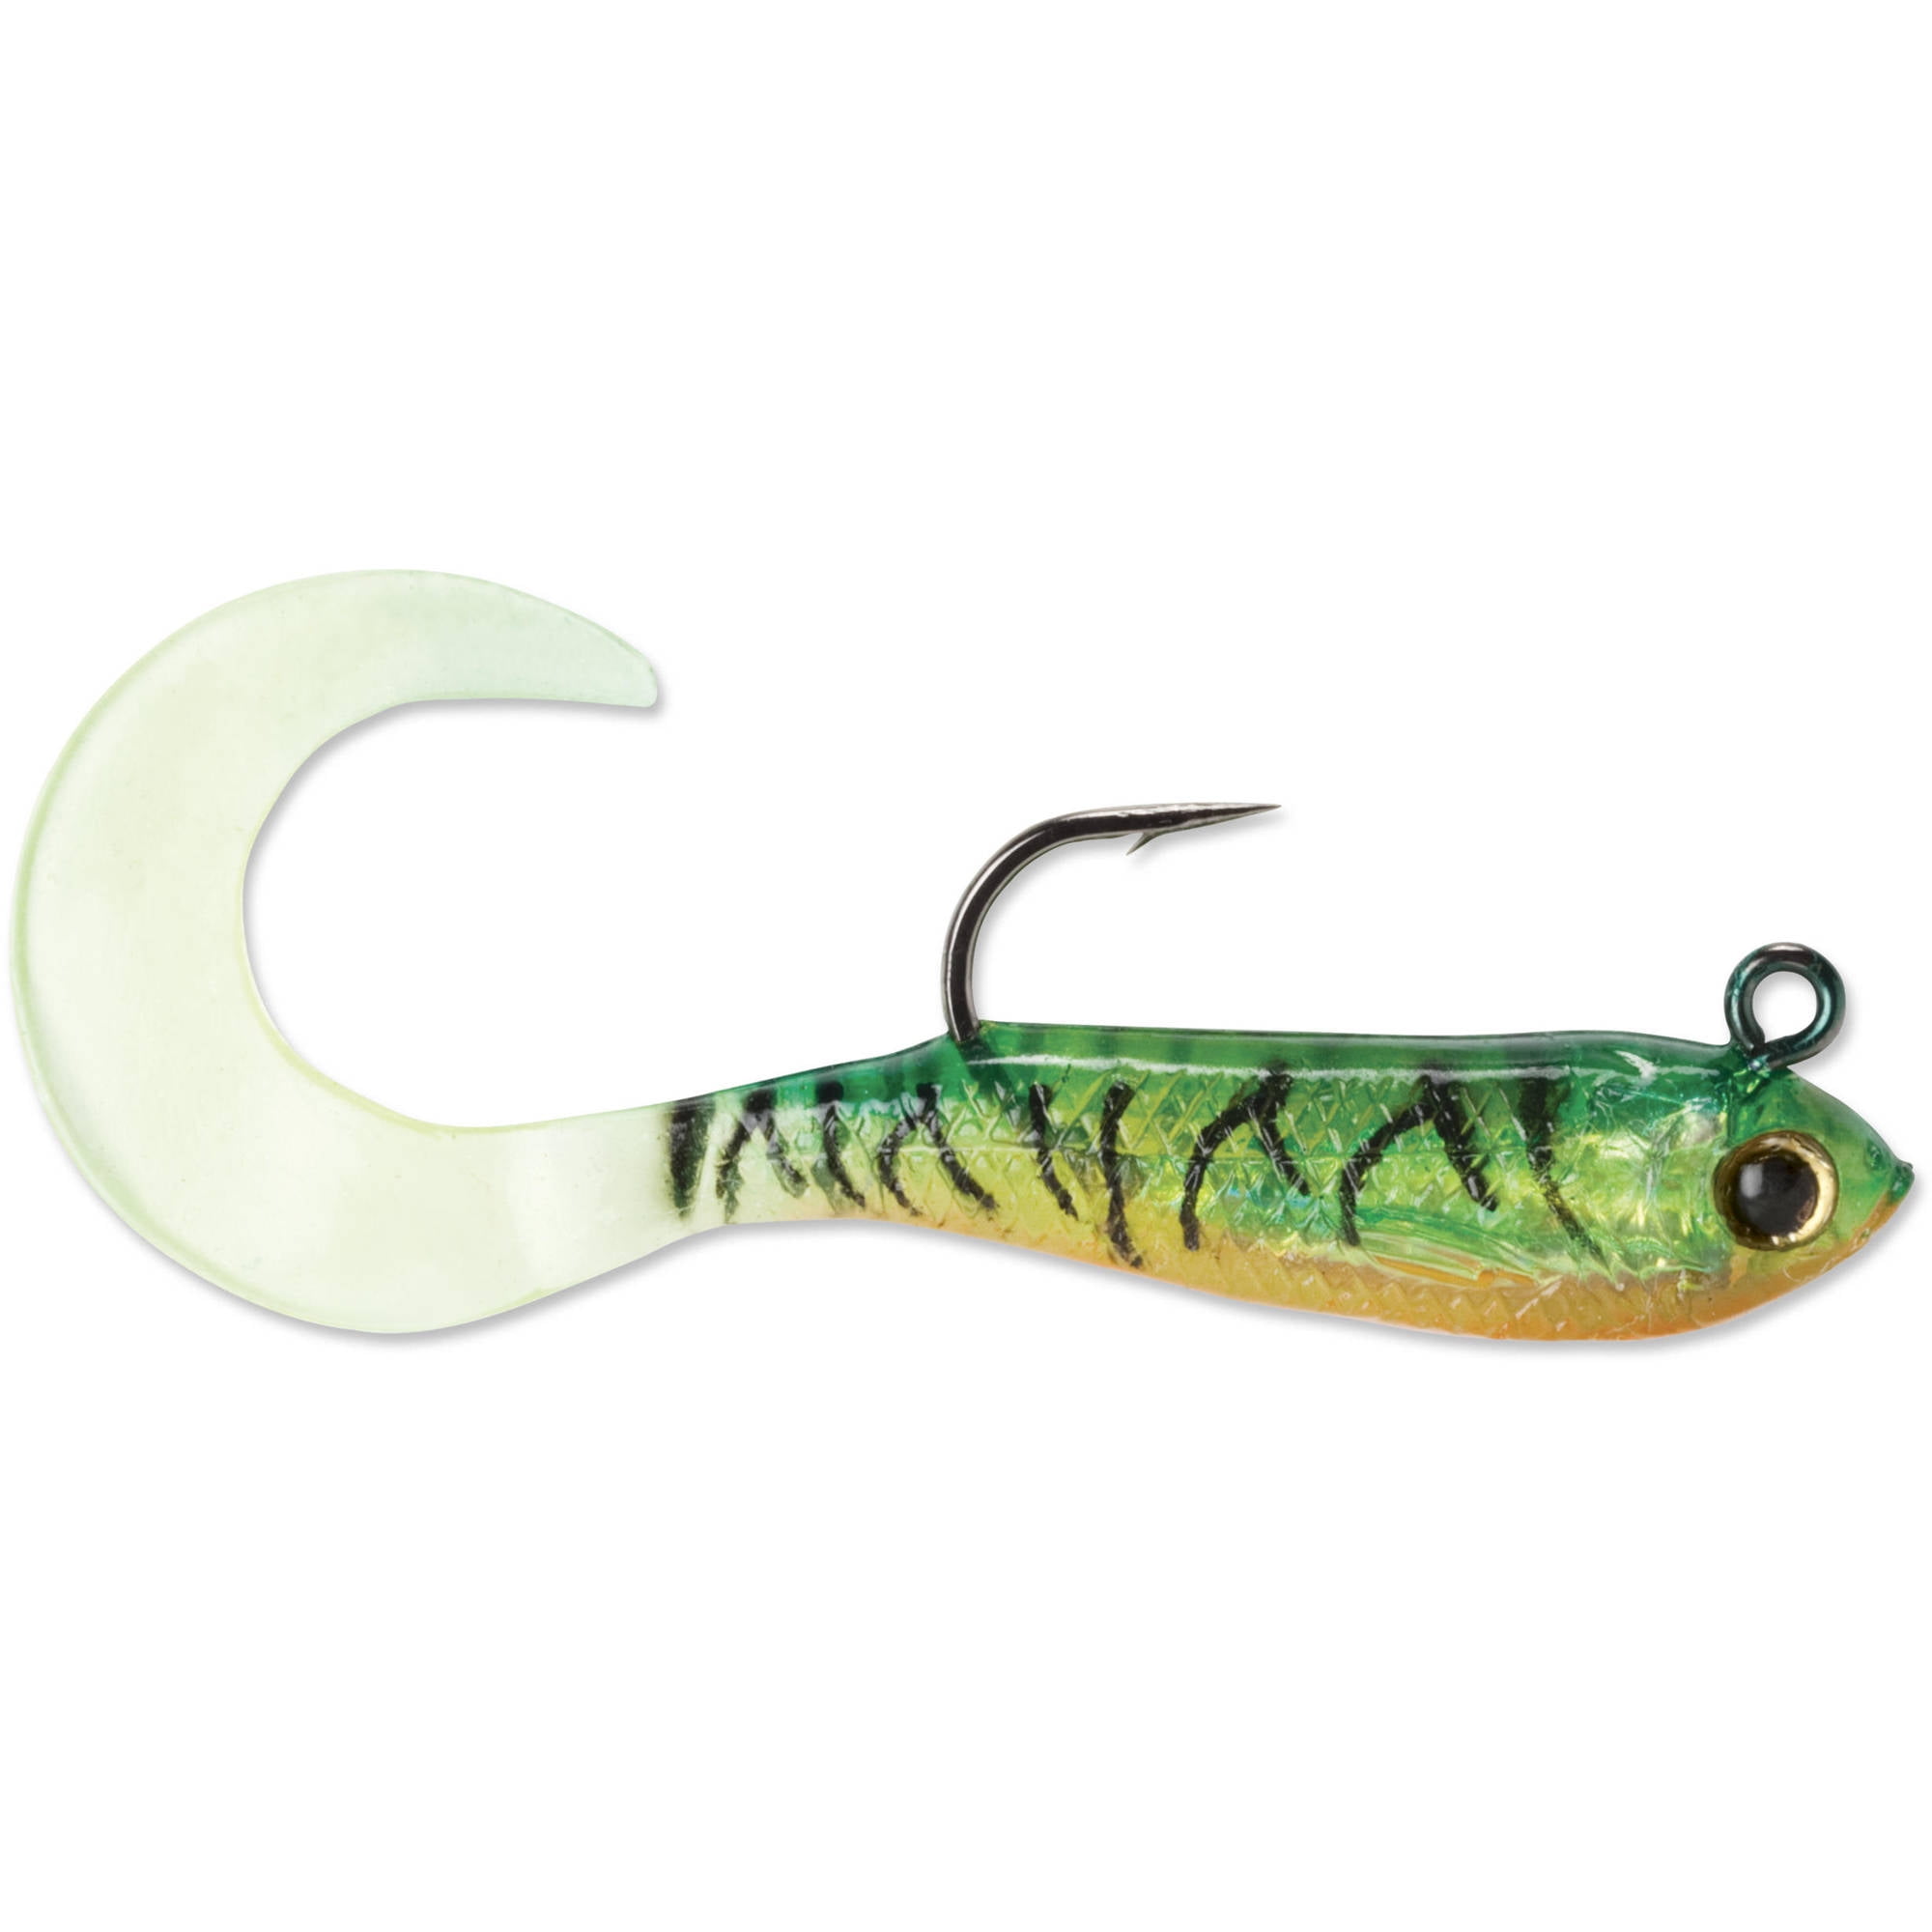 Details about   Curl Tail  Minnow 4" Aqua Green Silver And Green Glitter Lot Of 20 Wham Fisheze 